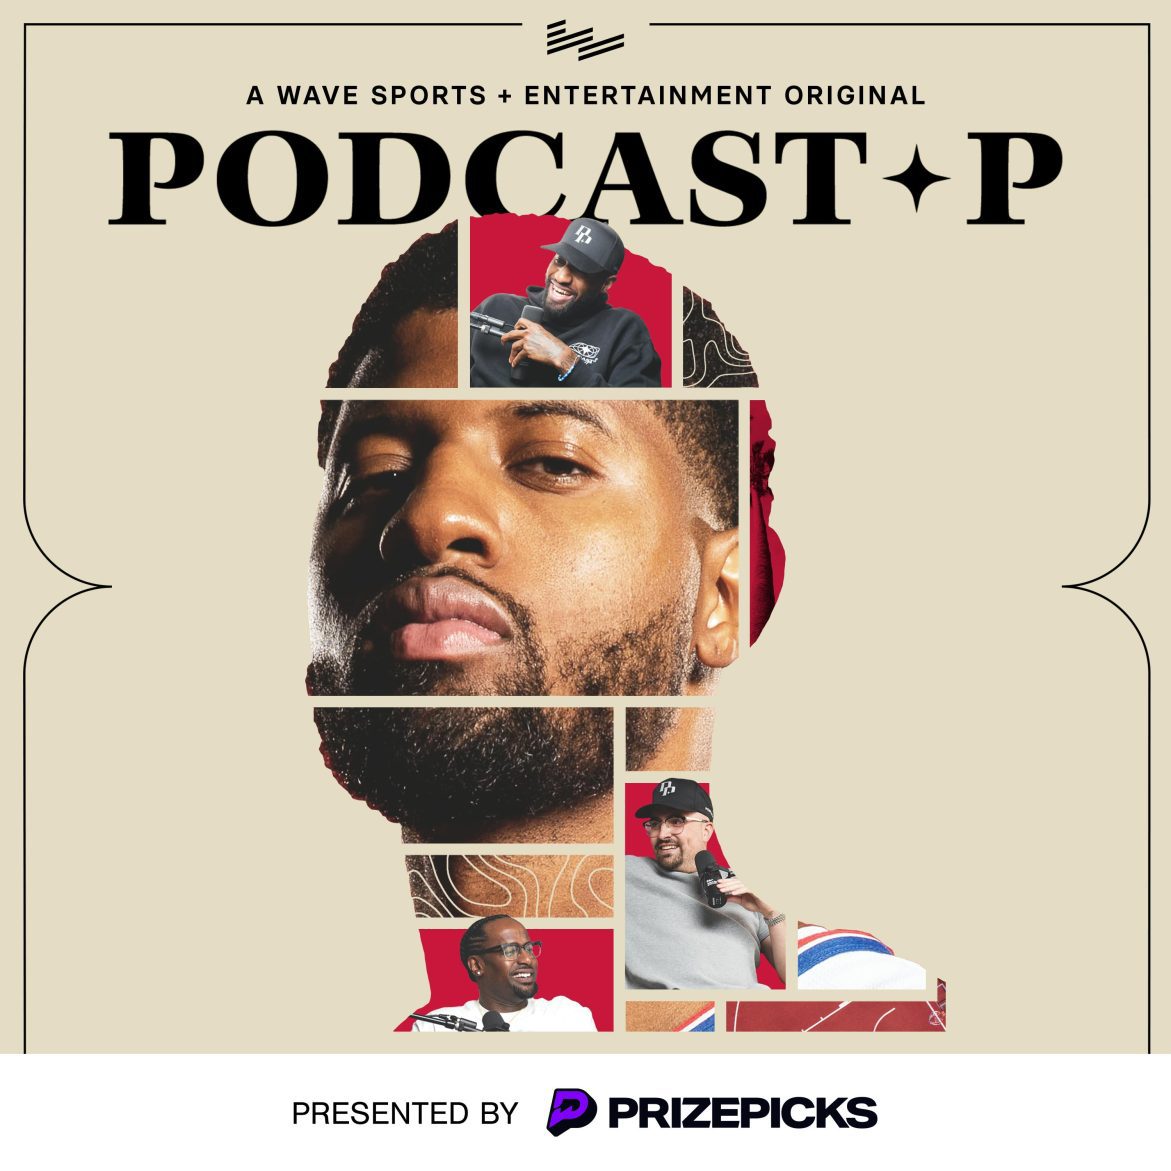 Black Podcasting - Untold Stories About Young Kobe, Beating Jordan, Latrell Sprewell, Larry Bird & More | STORY MODE